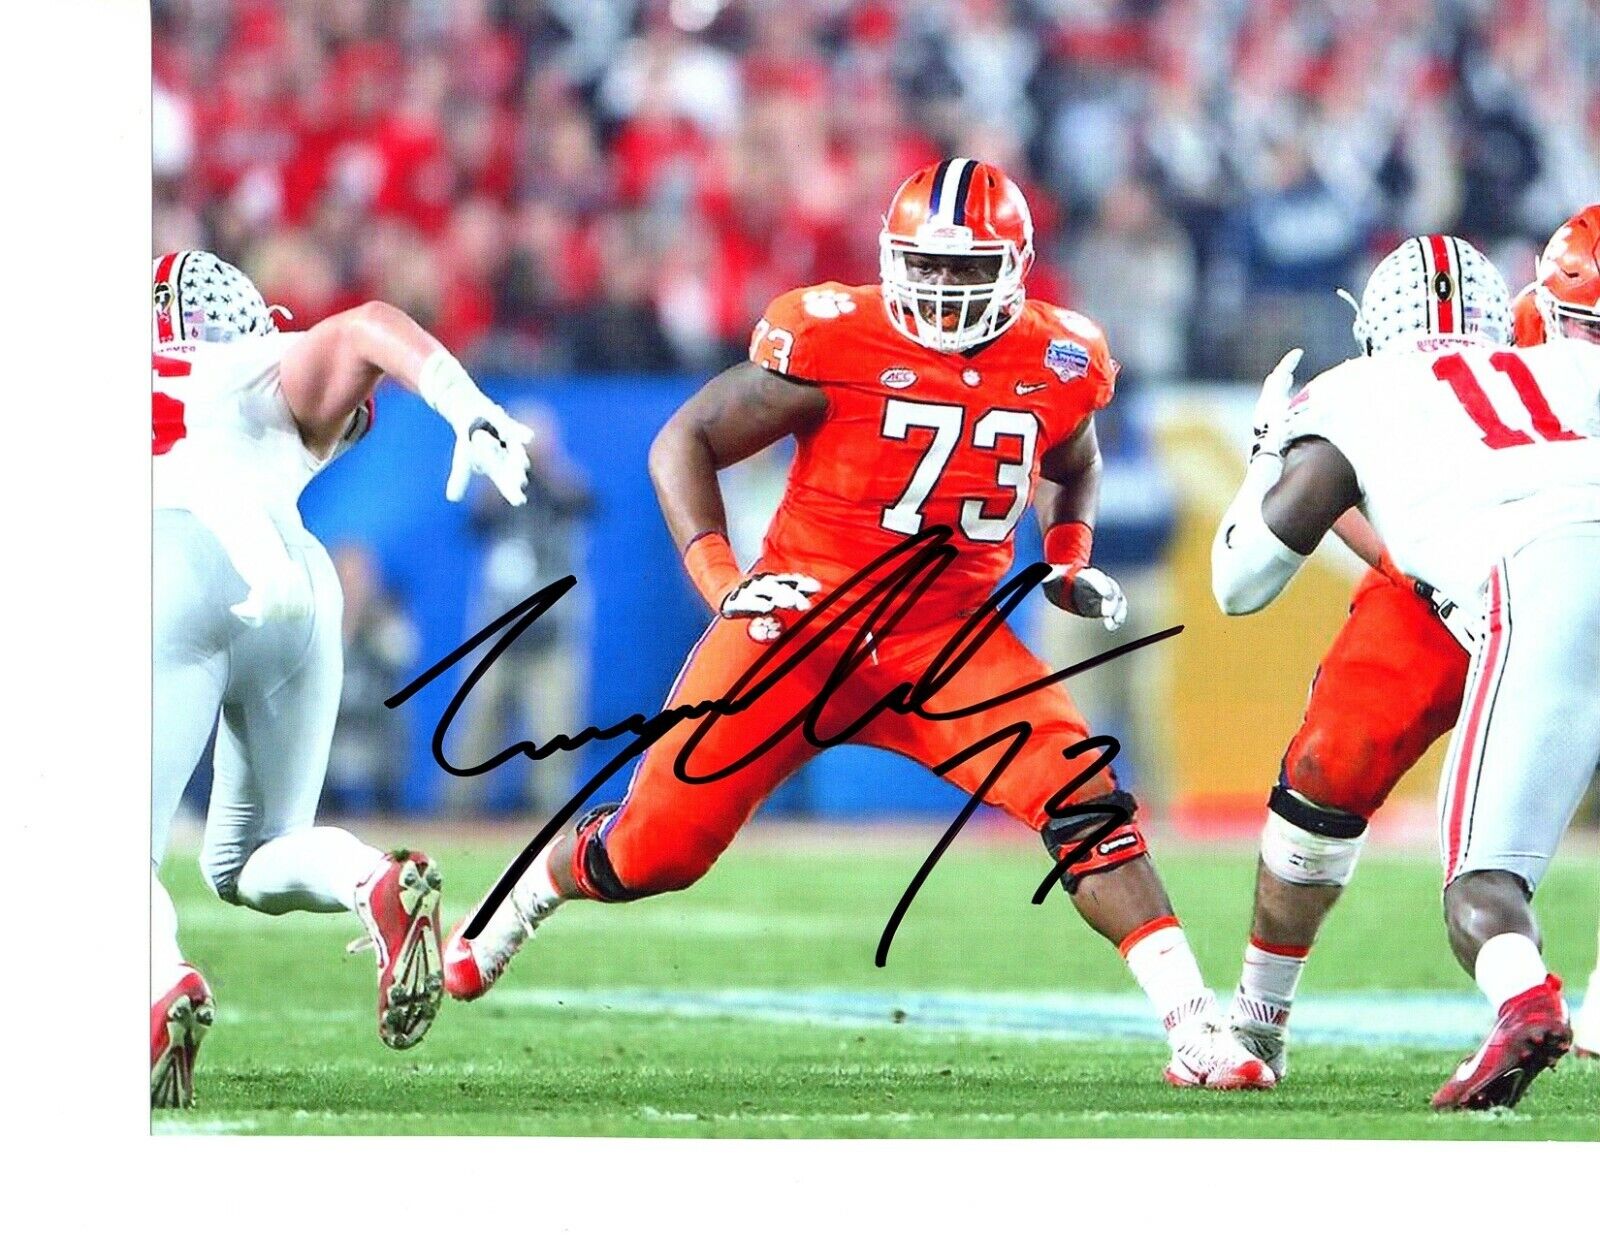 Tremayne Anchrum Jr. Clemson Tigers signed autographed 8x10 football Photo Poster painting b